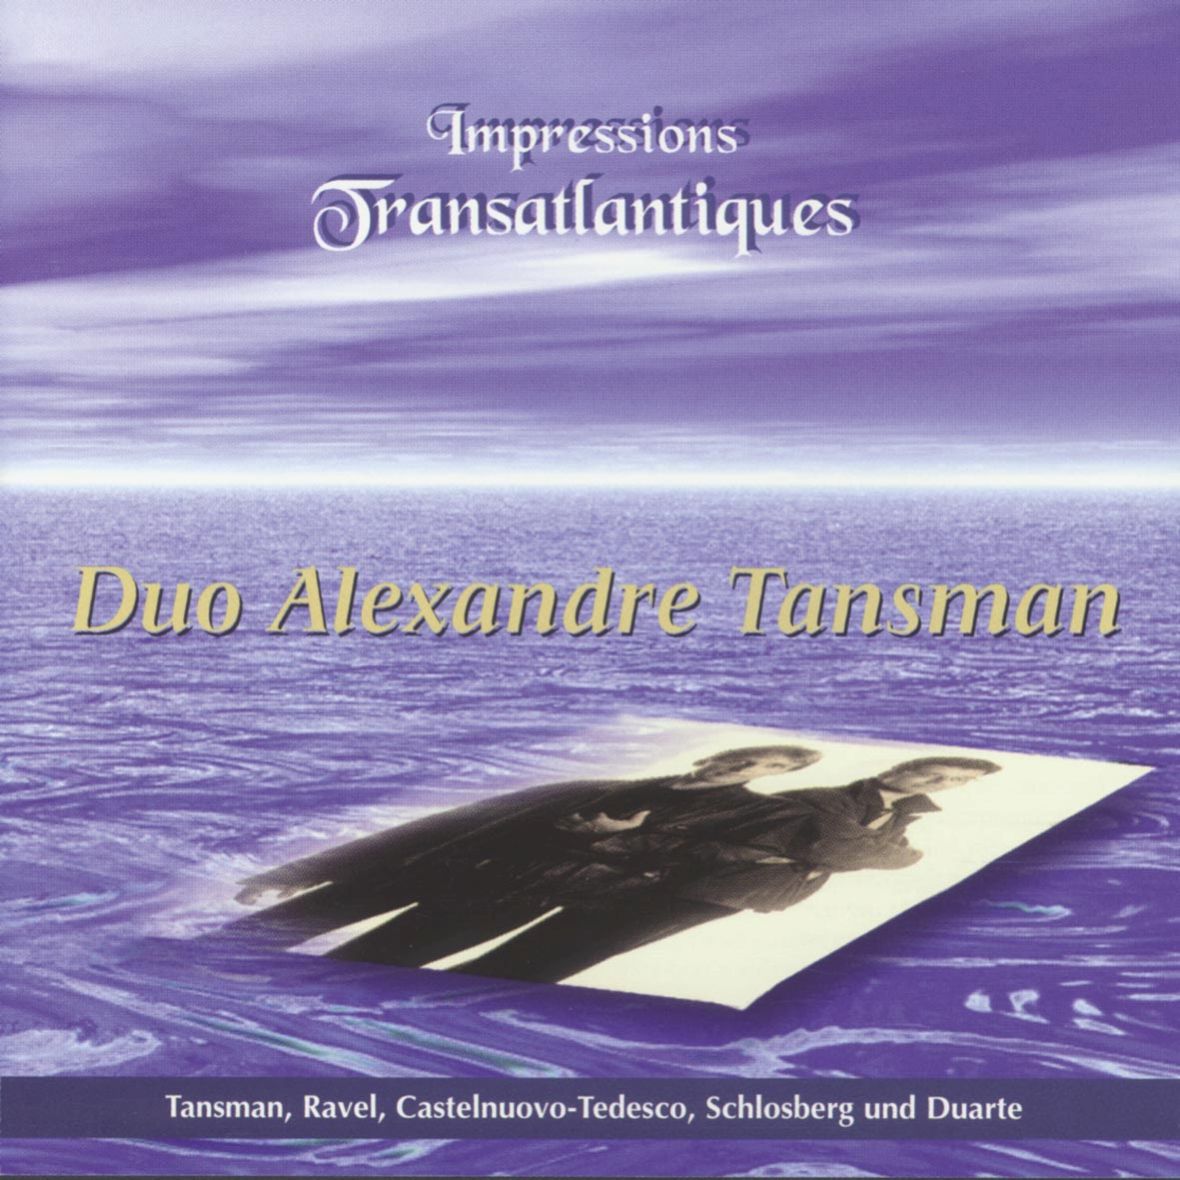 Impressions cover.jpg